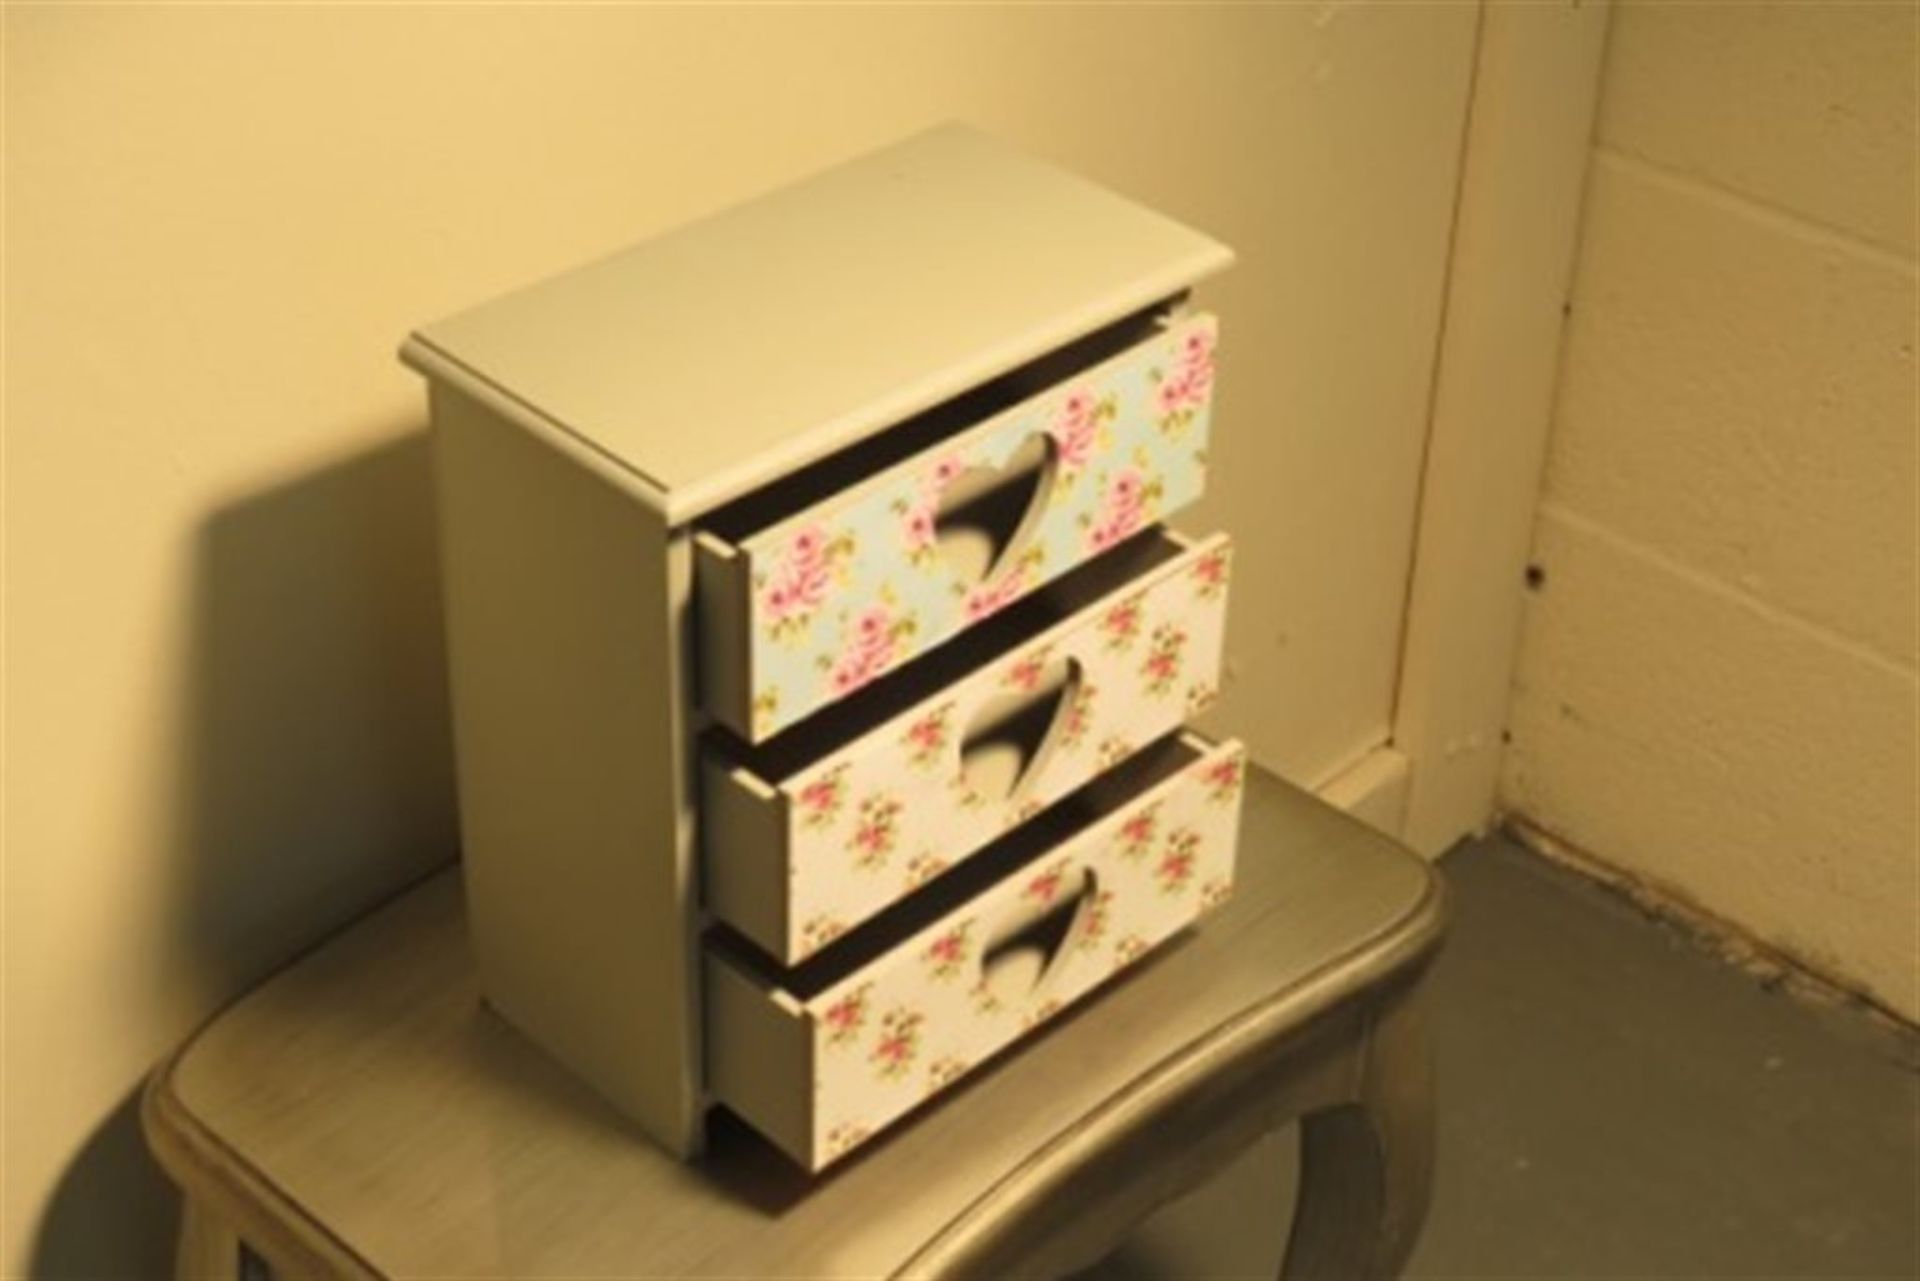 BRAND NEW WOODEN FLORAL JEWELLERY BOX - 3 DRAWERS - Image 2 of 2